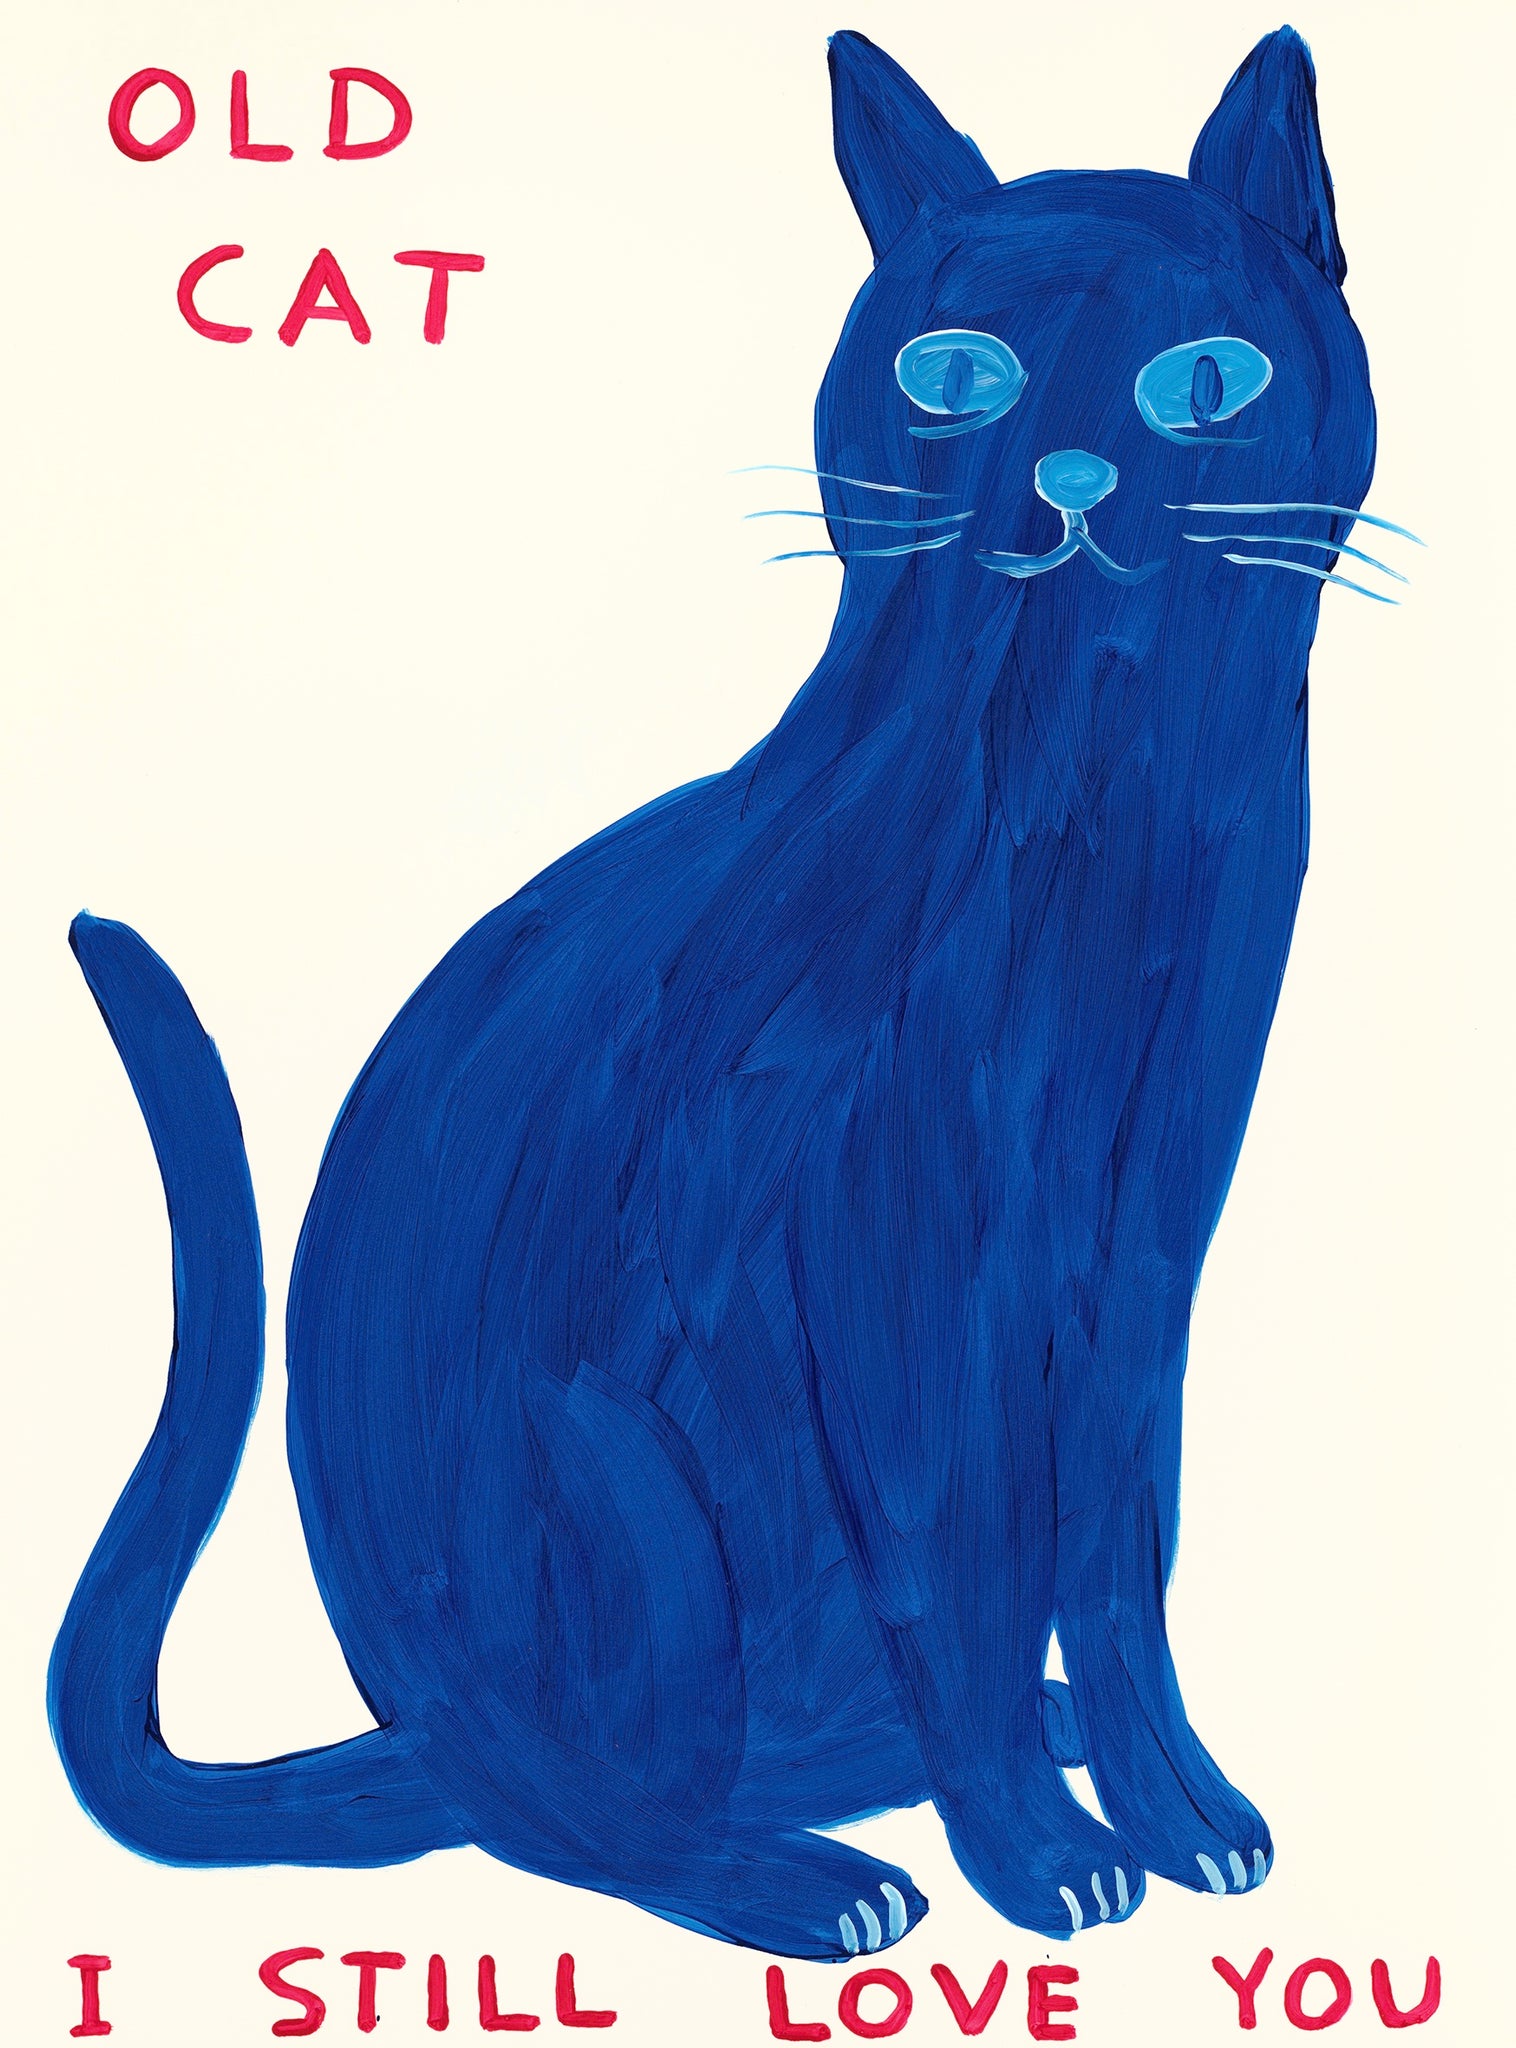 Old Cat, 2022 by David Shrigley is a limited edition, 12 colour screenprint with a varnish overlay. Discover the full collection of available artworks at Jealous. Purchase online or explore more prints on the gallery website.